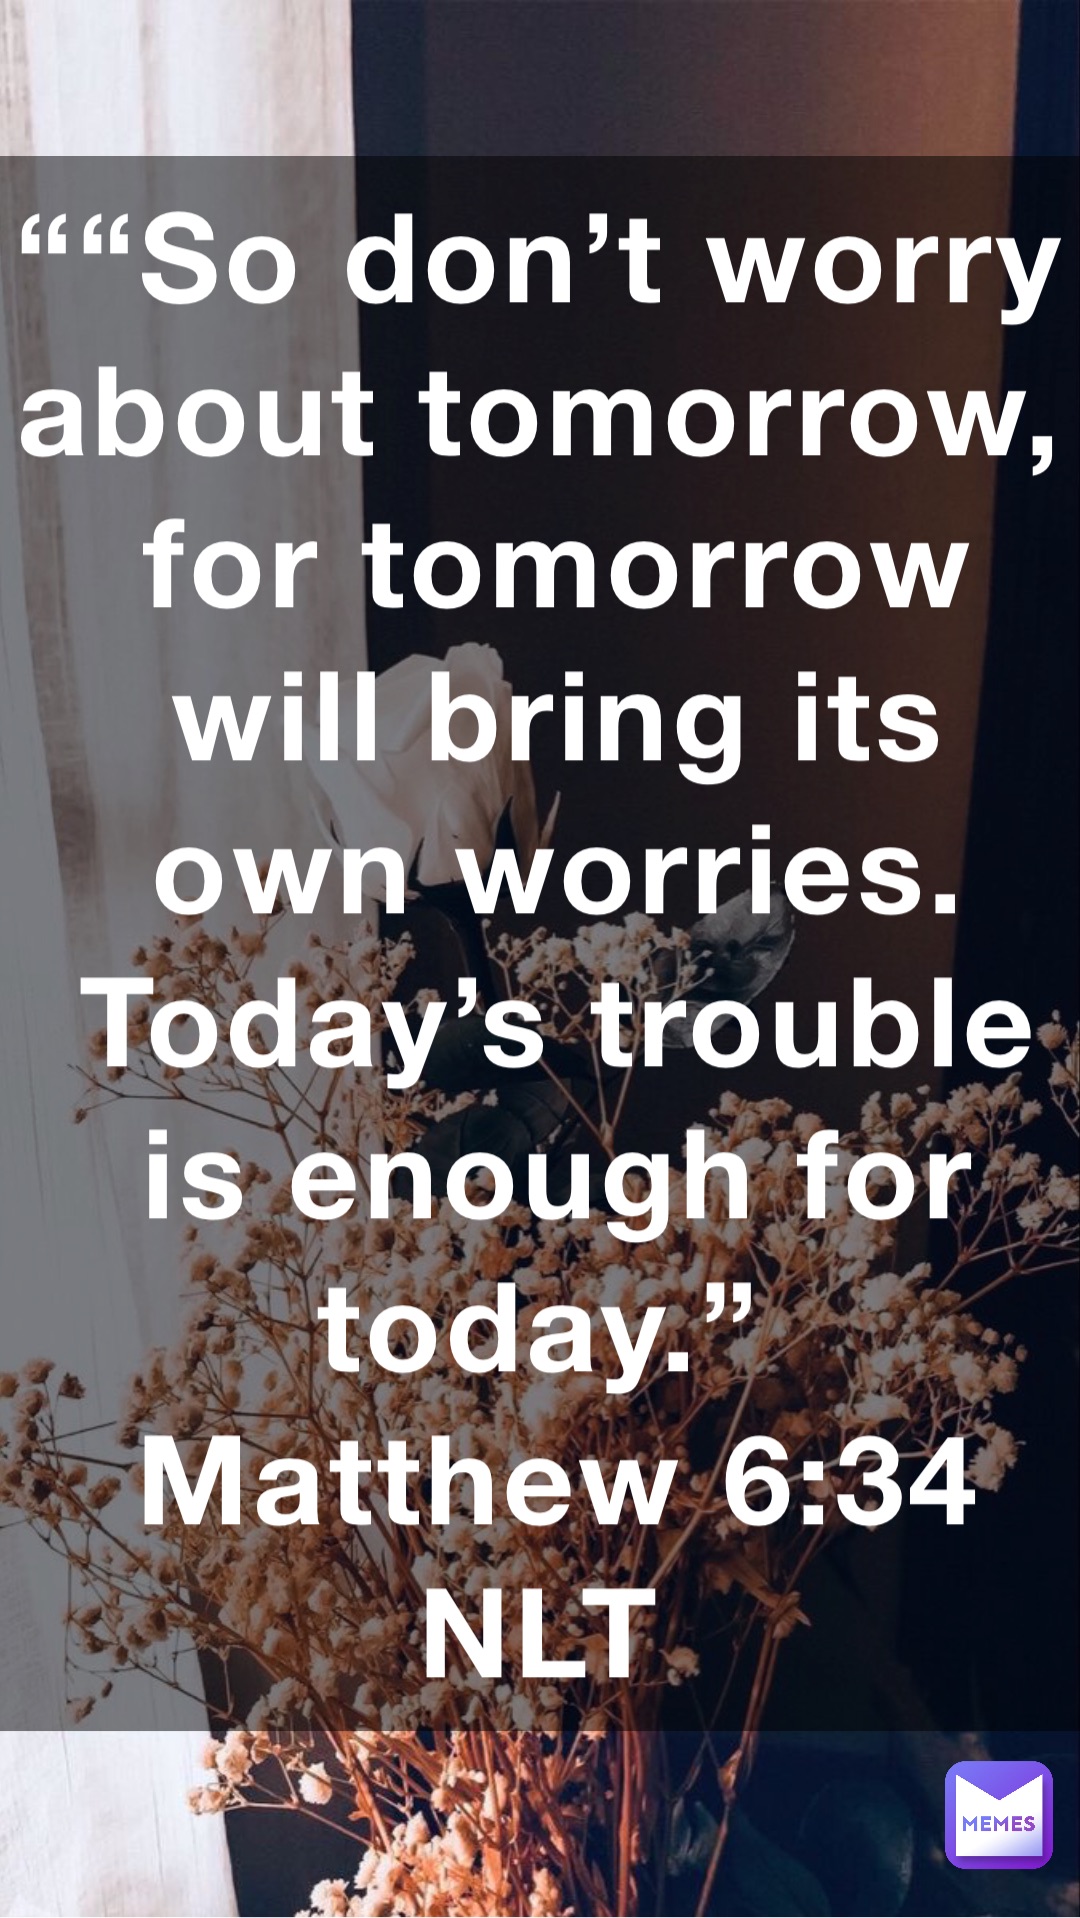 ““So don’t worry about tomorrow, for tomorrow will bring its own worries. Today’s trouble is enough for today.”
‭‭Matthew‬ ‭6:34‬ ‭NLT‬‬